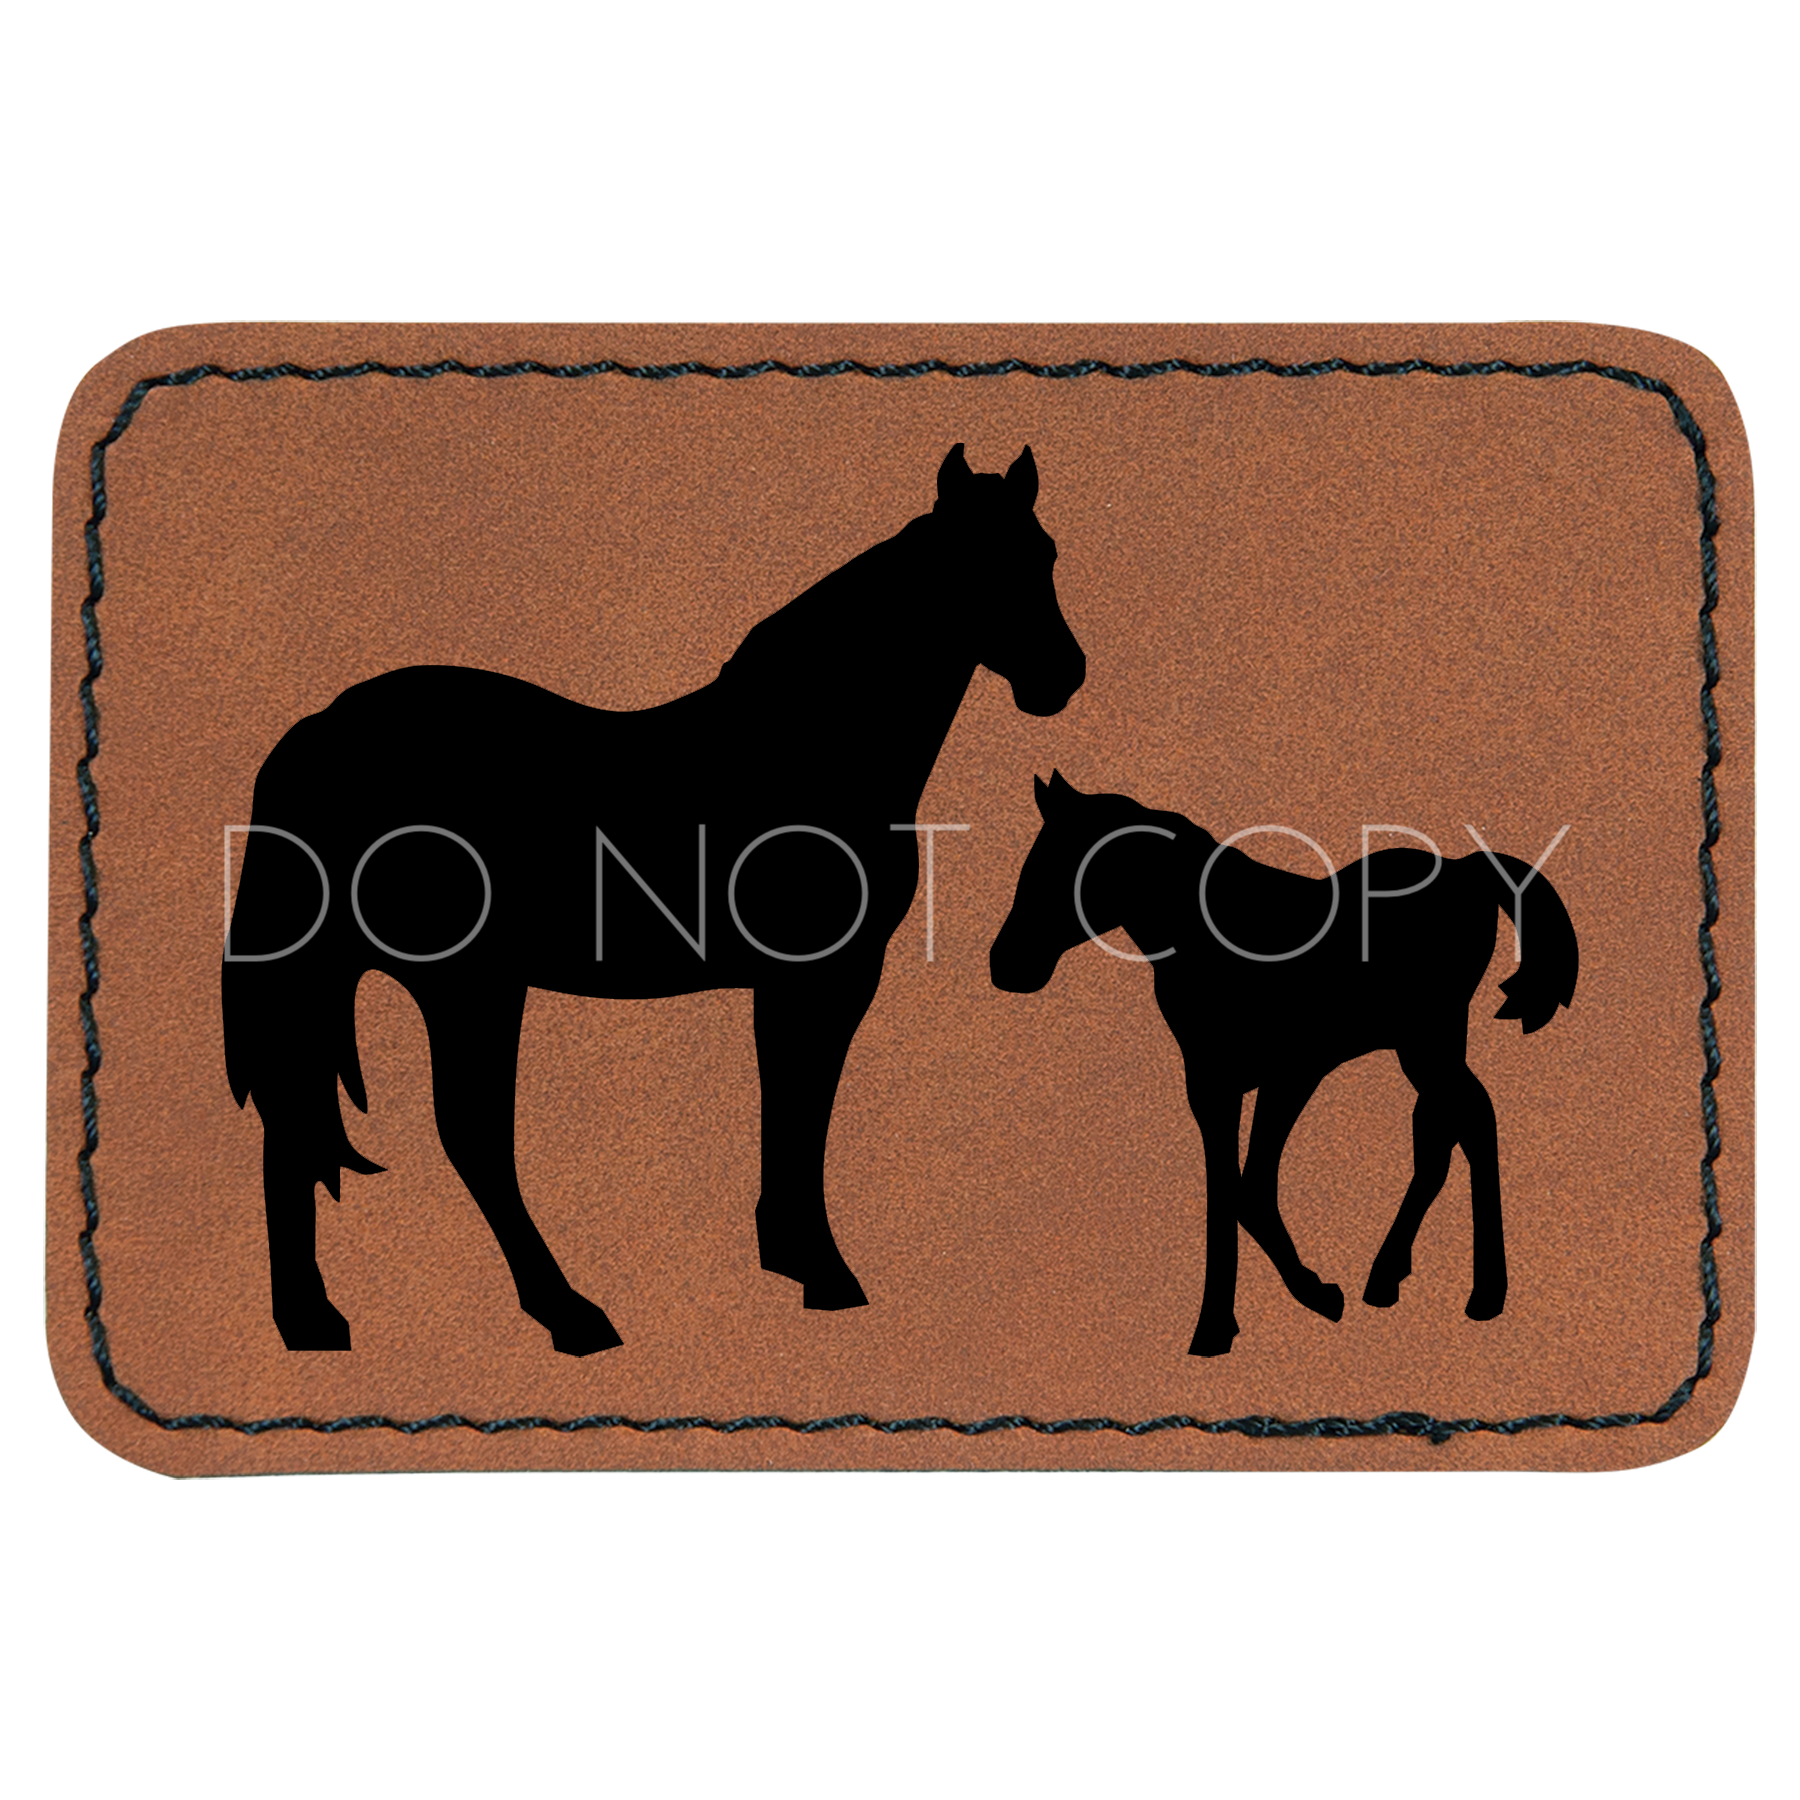 Horse Patch